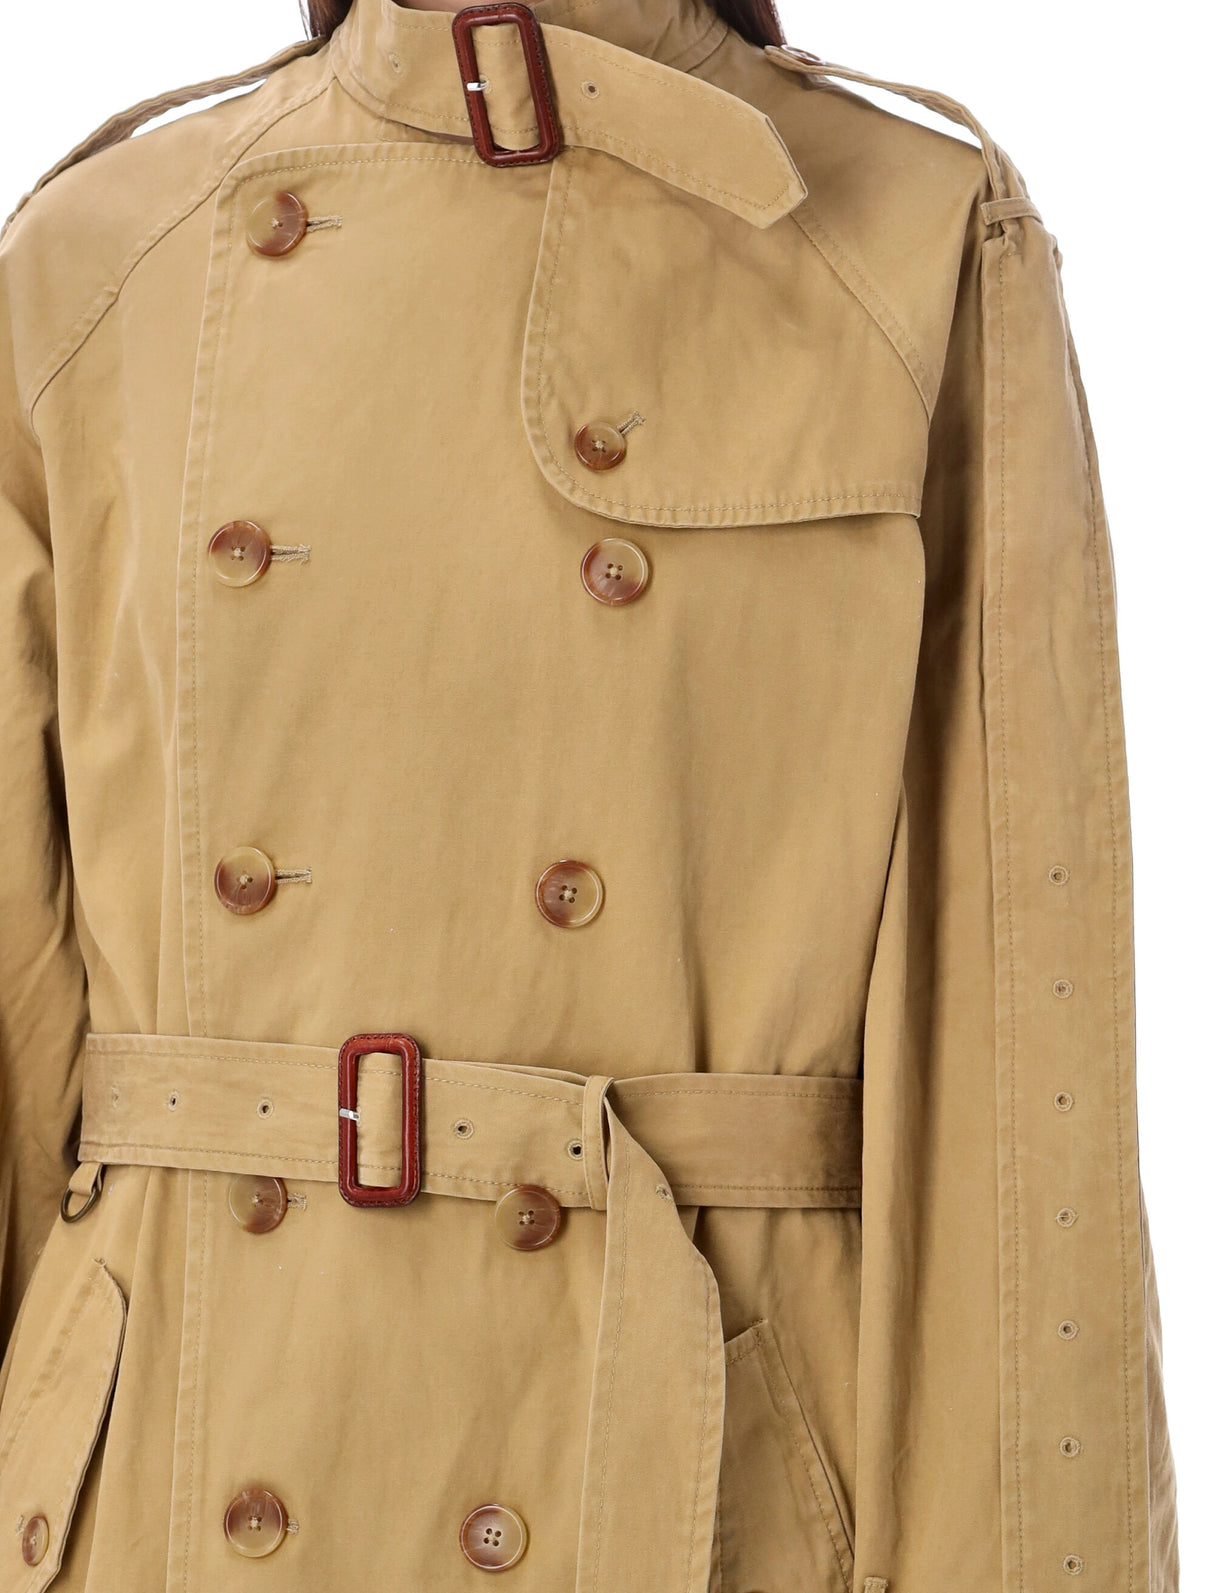 R13 Oversized Deconstructed Trench Jacket in Tan for Women - SS24